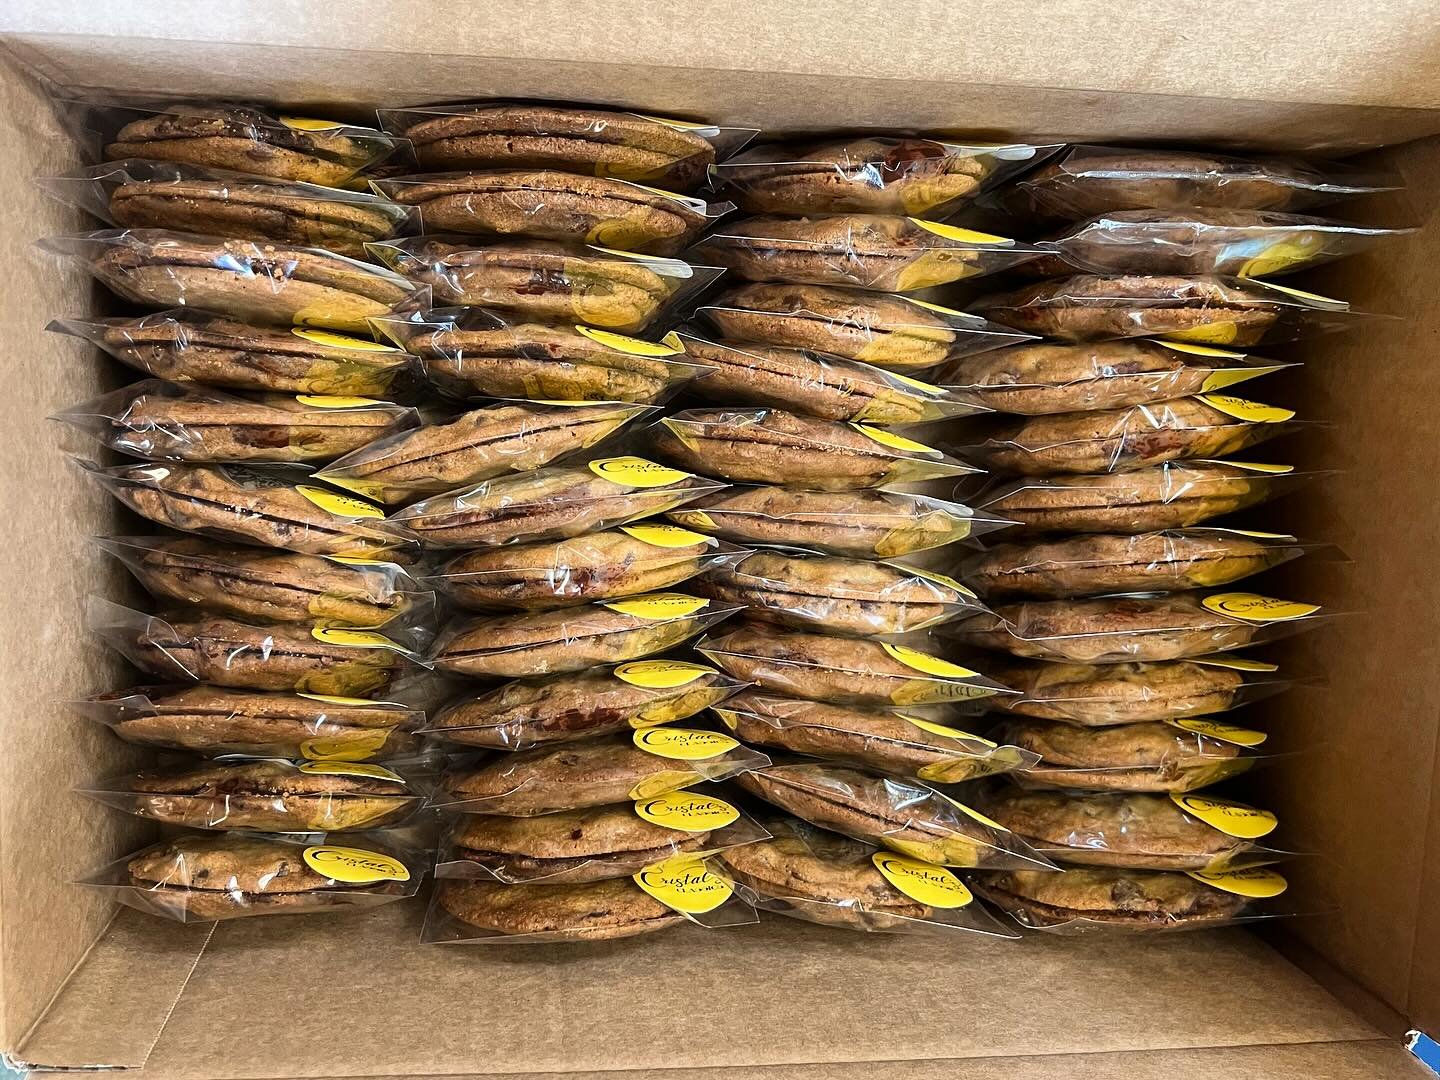 the first of many batches! talk about a production line 😱🤩

☎️310&bull;490&bull;3246
📍3938 West 146th St. Hawthorne CA 90250
💸All major credit cards, Apple Pay, Zelle, &amp; Venmo

#CristalsClassics #SouthBay #SouthBayFavorites #CityofHawthorne #